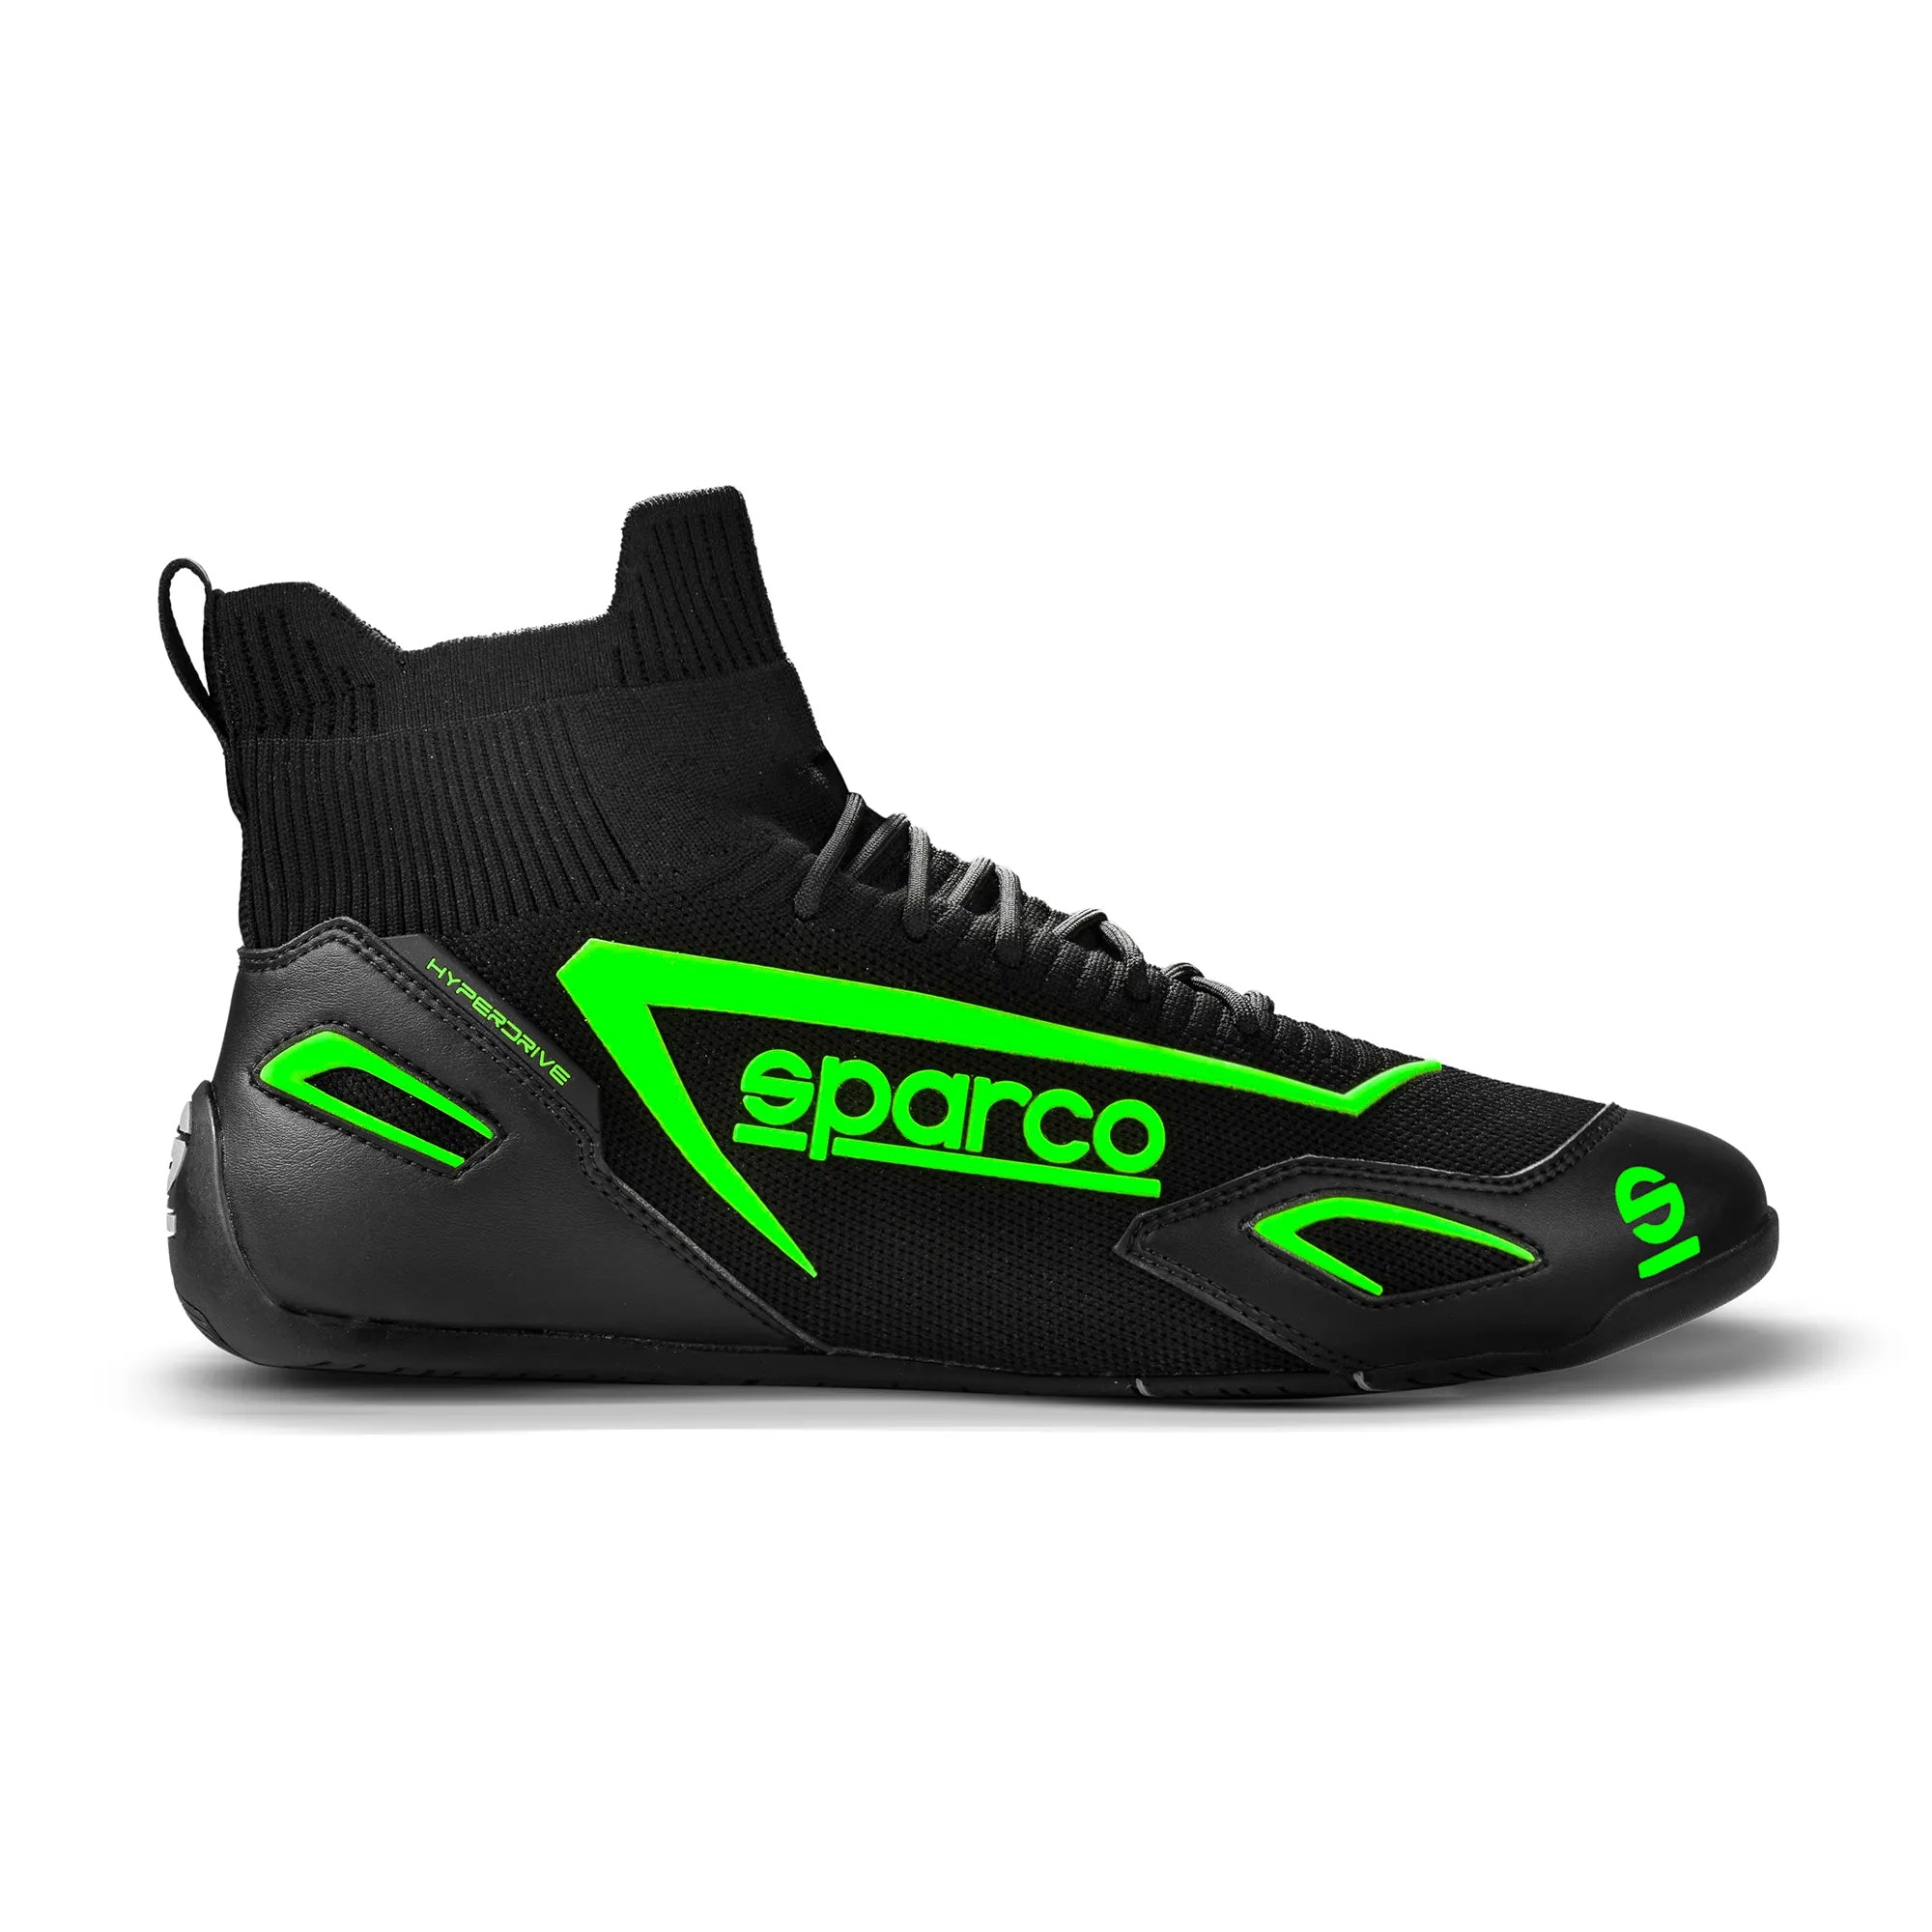 SPARCO 00129345NRVF Gaming sim racing shoes HYPERDRIVE, black/green, size 45 Photo-0 